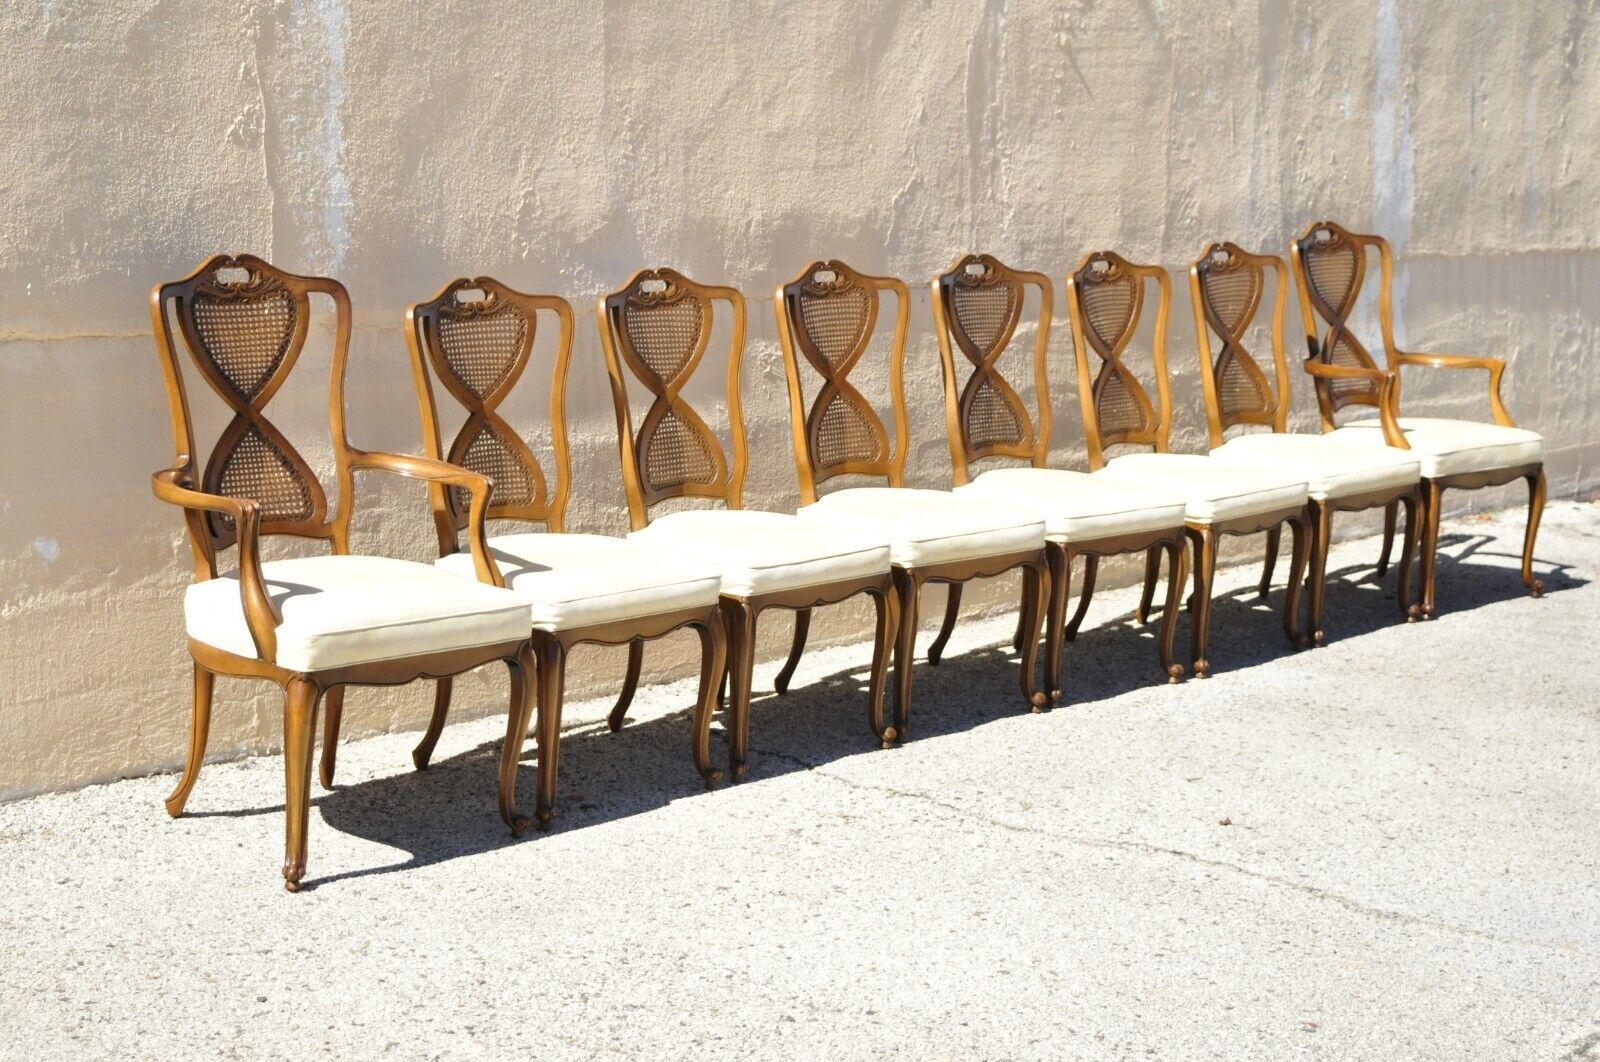 Vintage French provincial Hollywood Regency cane back pretzel twist dining chair - set of 8. Item features (2) armchairs, (6) side chairs, cane back panels, vinyl upholstered seats, pretzel twist carved backs, solid wood frames, cabriole legs. Vers